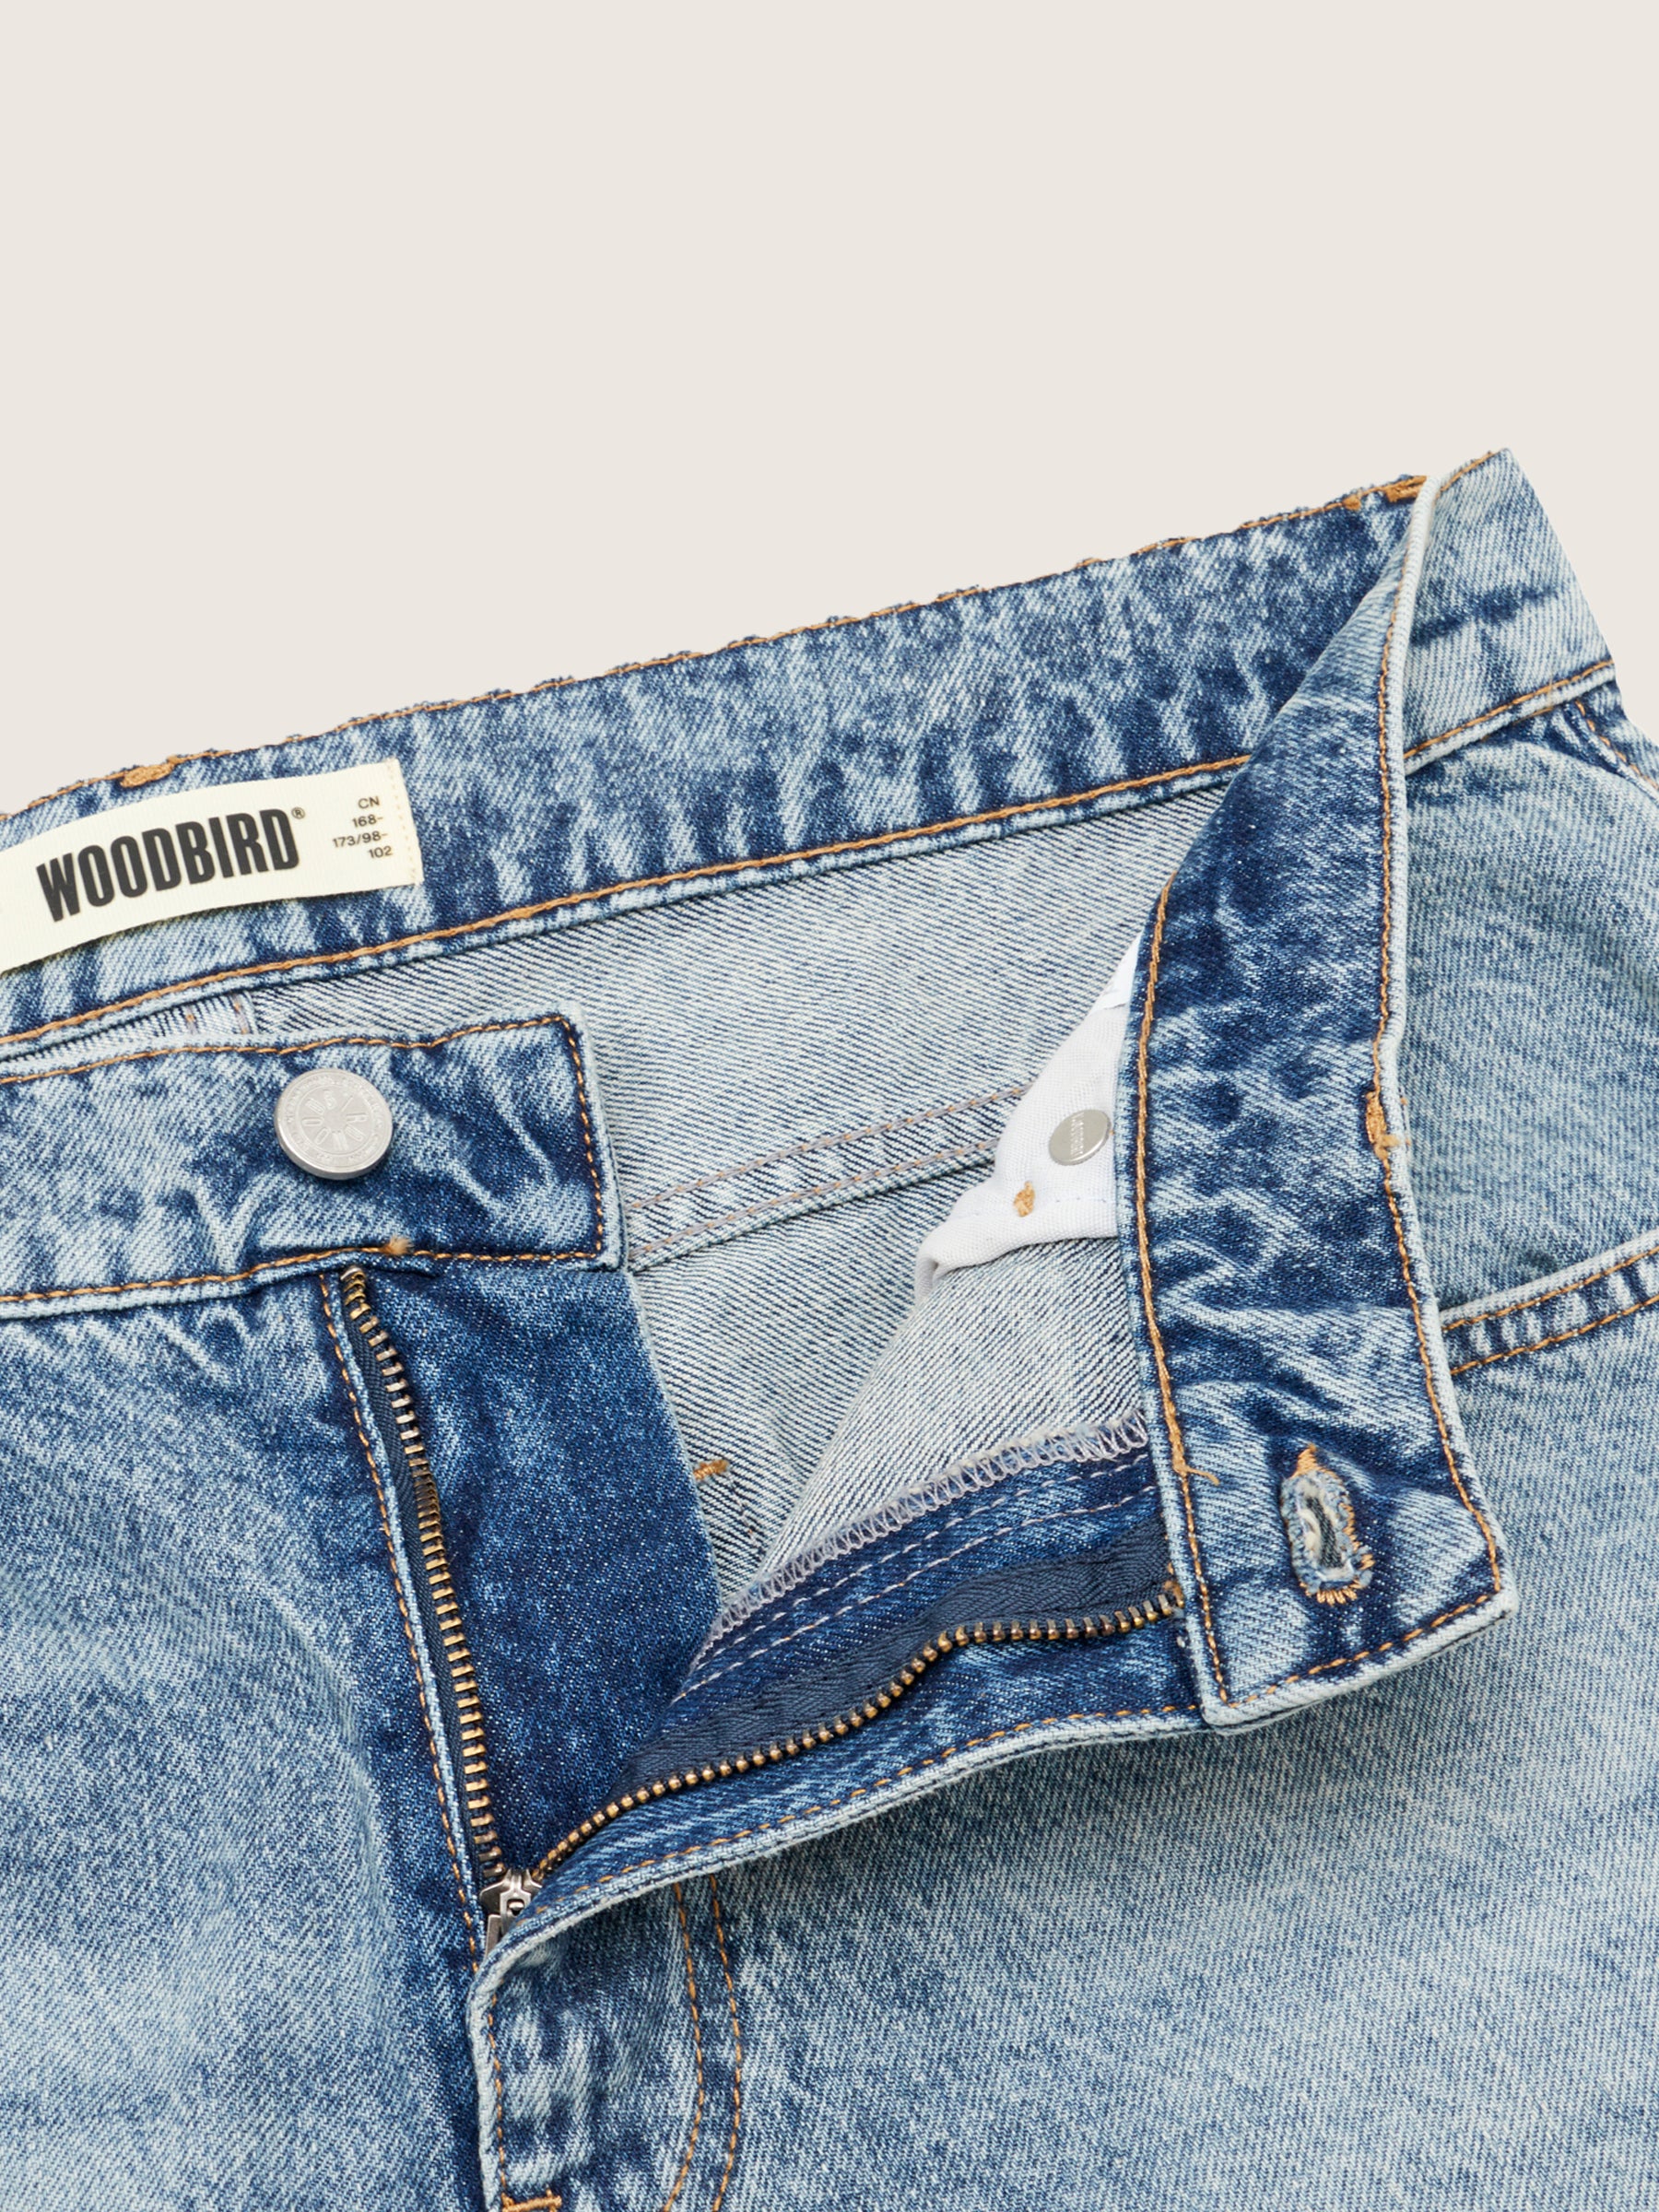 Woodbird WBDoc Vectorblue Jeans Jeans Mid Blue